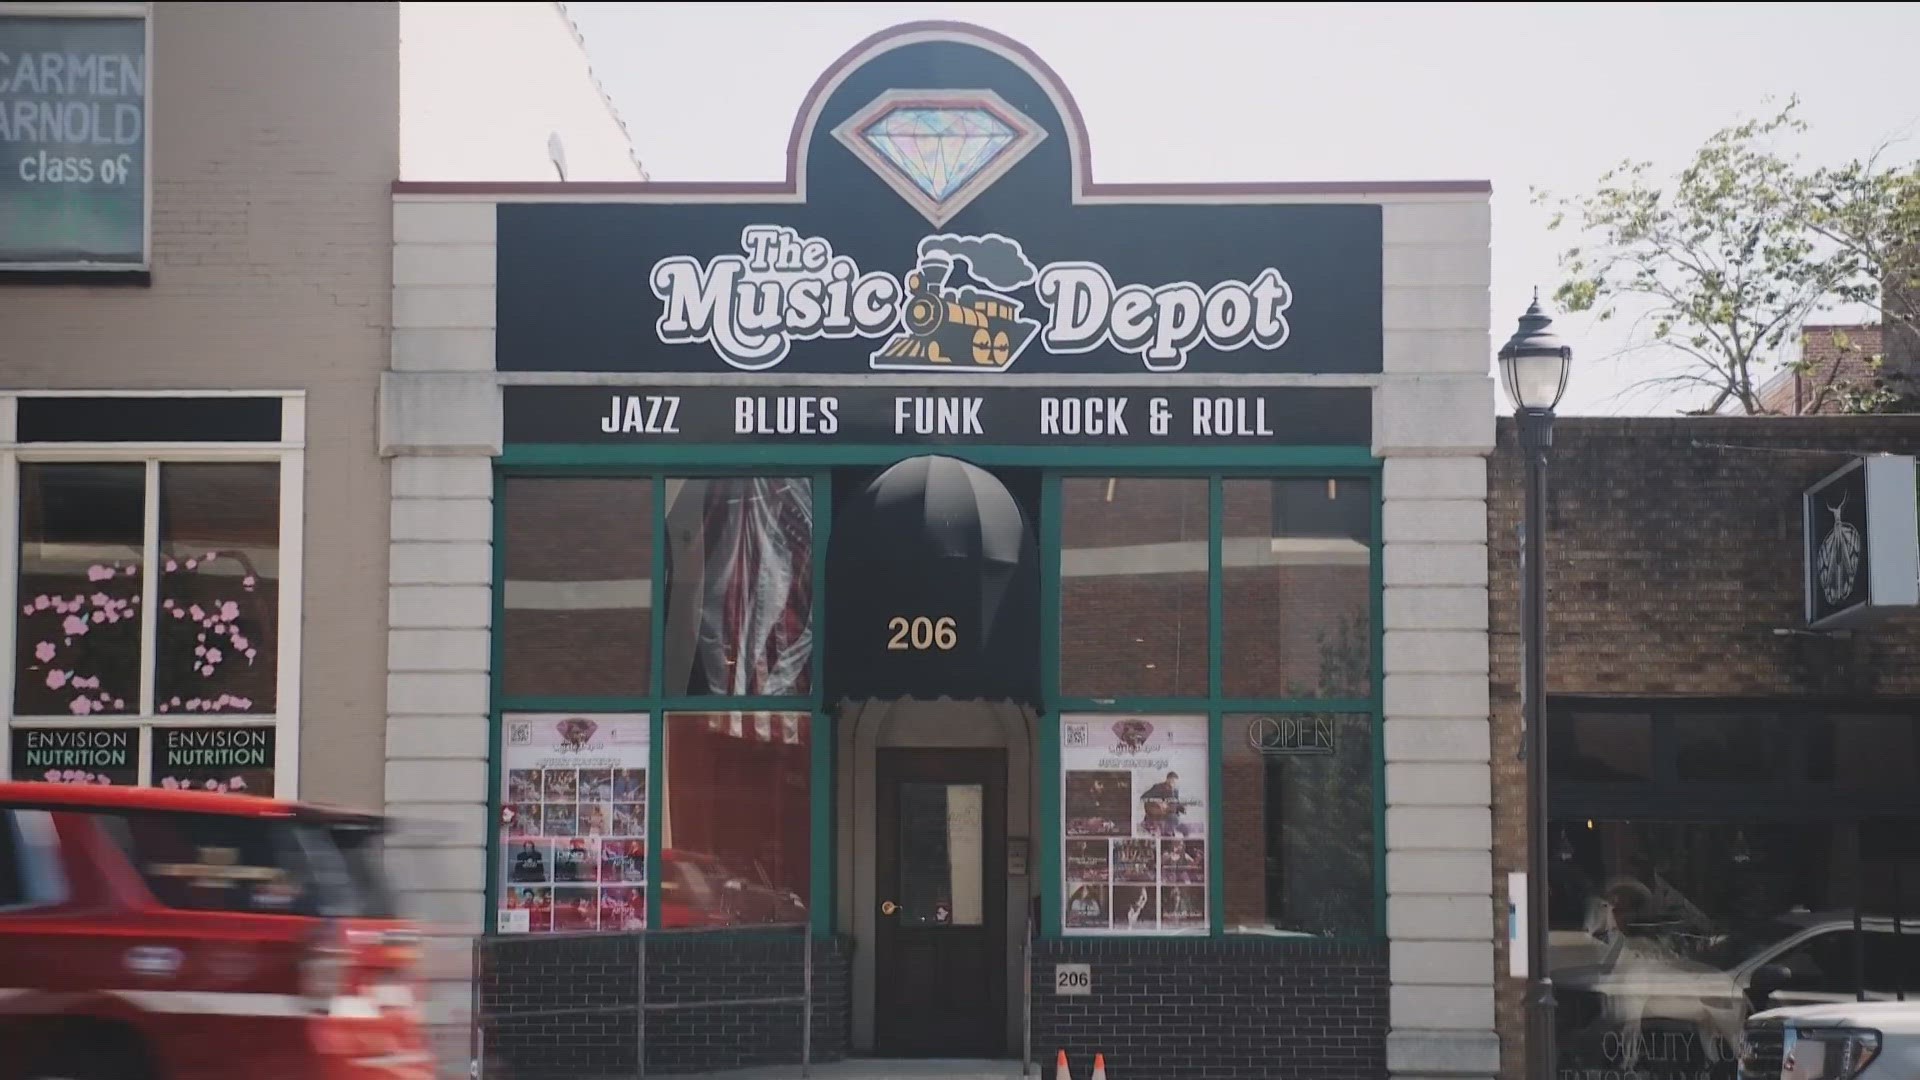 After its soft opening in July, The Music Depot closed its doors for renovations. Now, it's making a comeback with new bathrooms, a vault bar, and a drink menu.